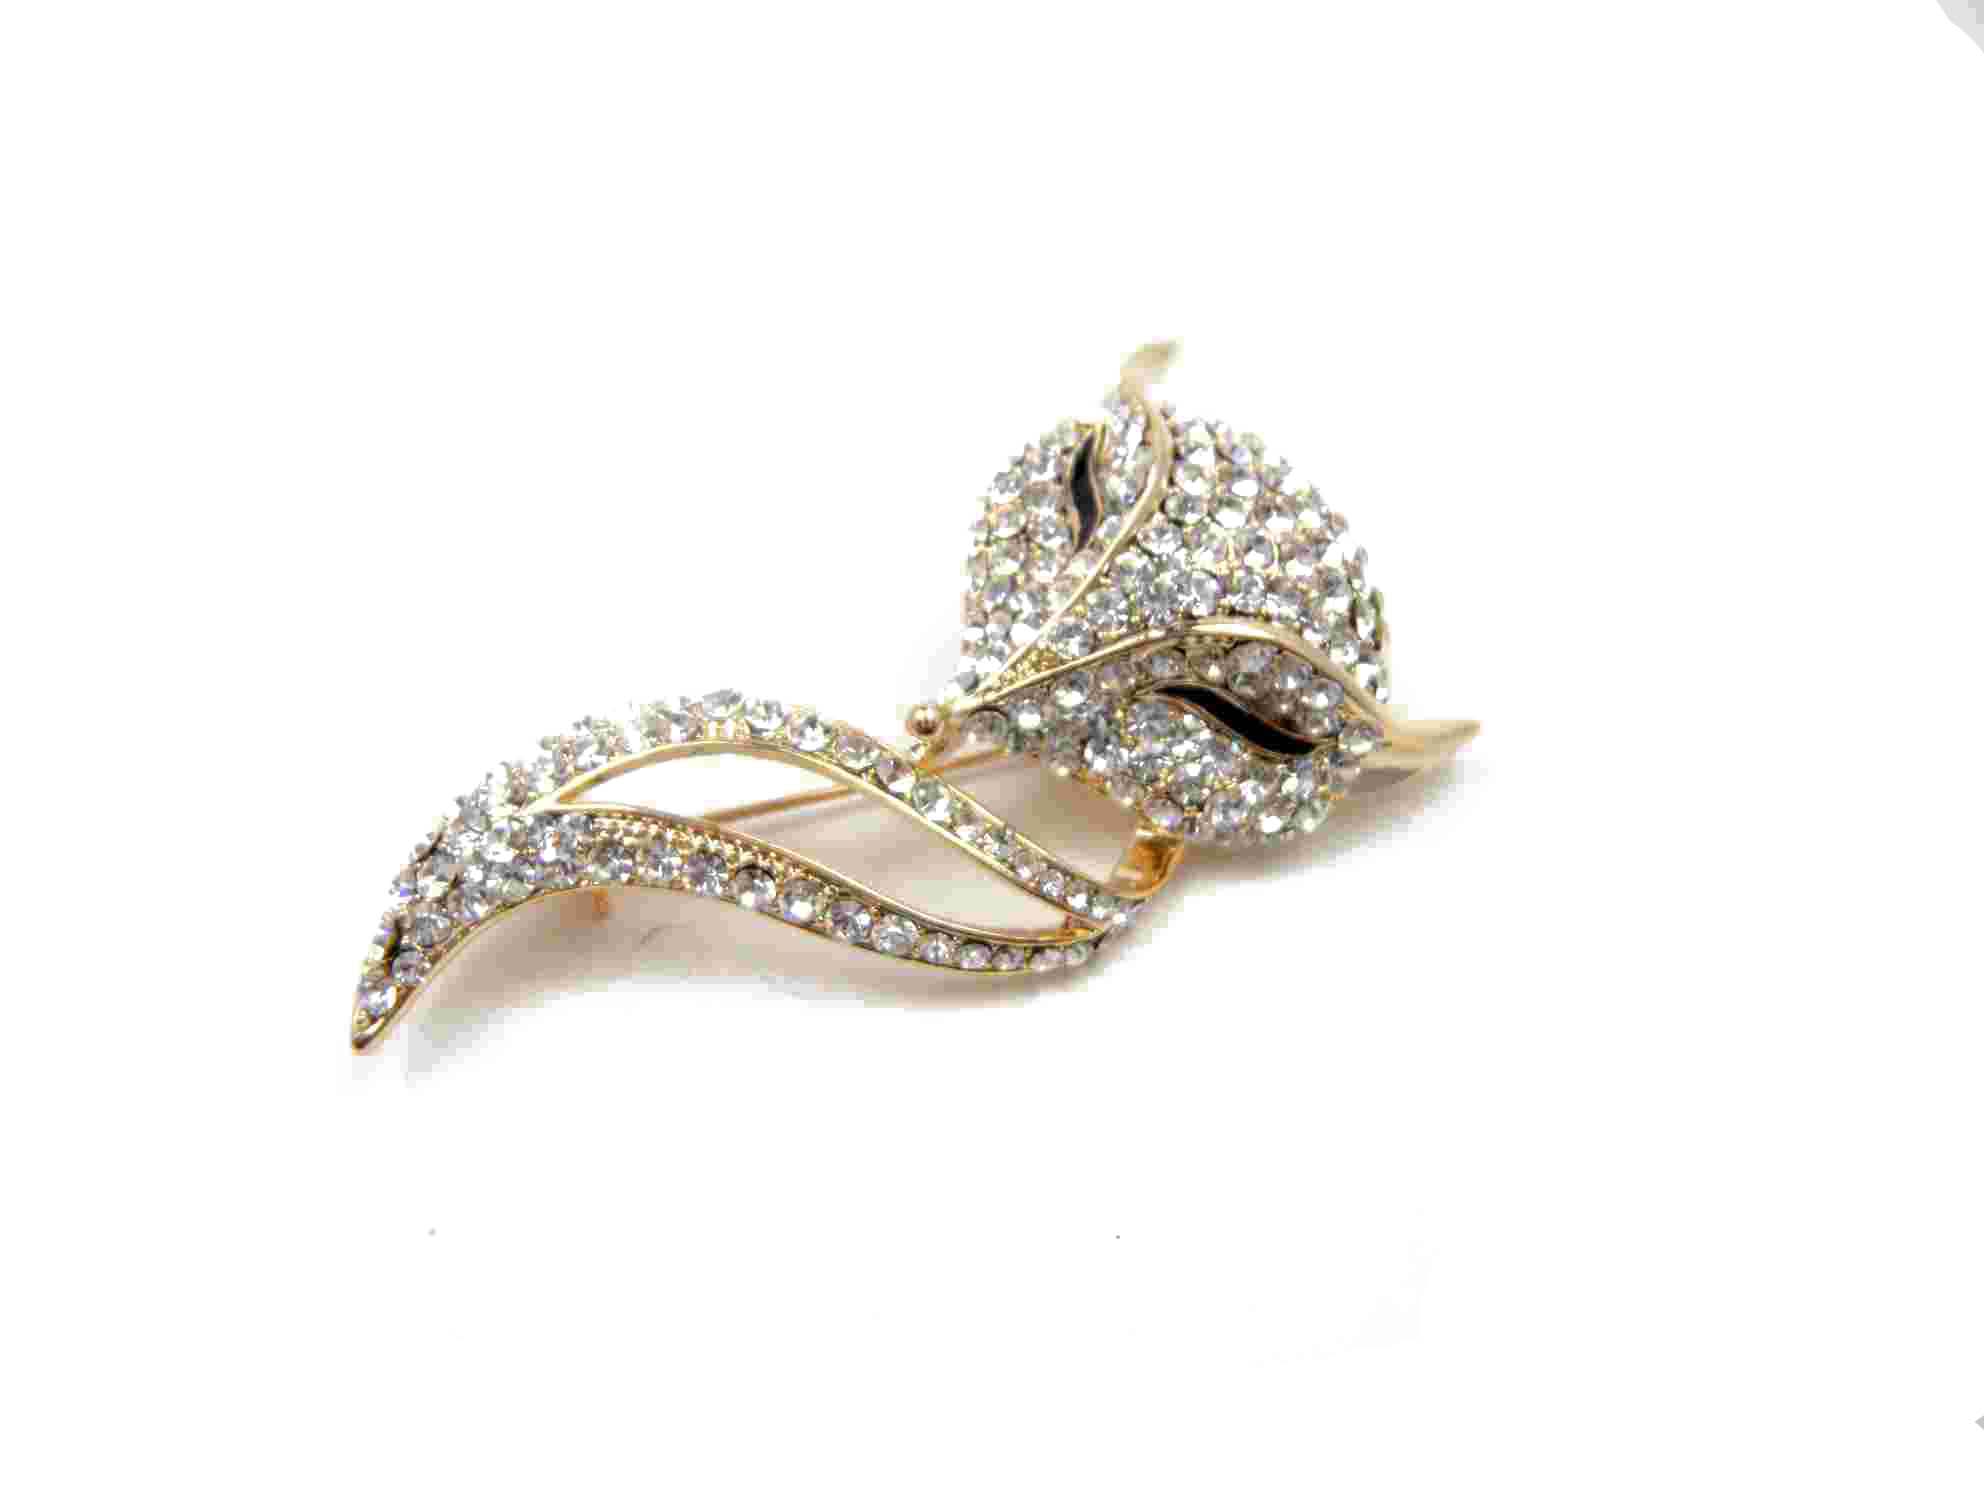 Fashionable butterfly brooch, made of zinc alloy and glass, available in various designs 